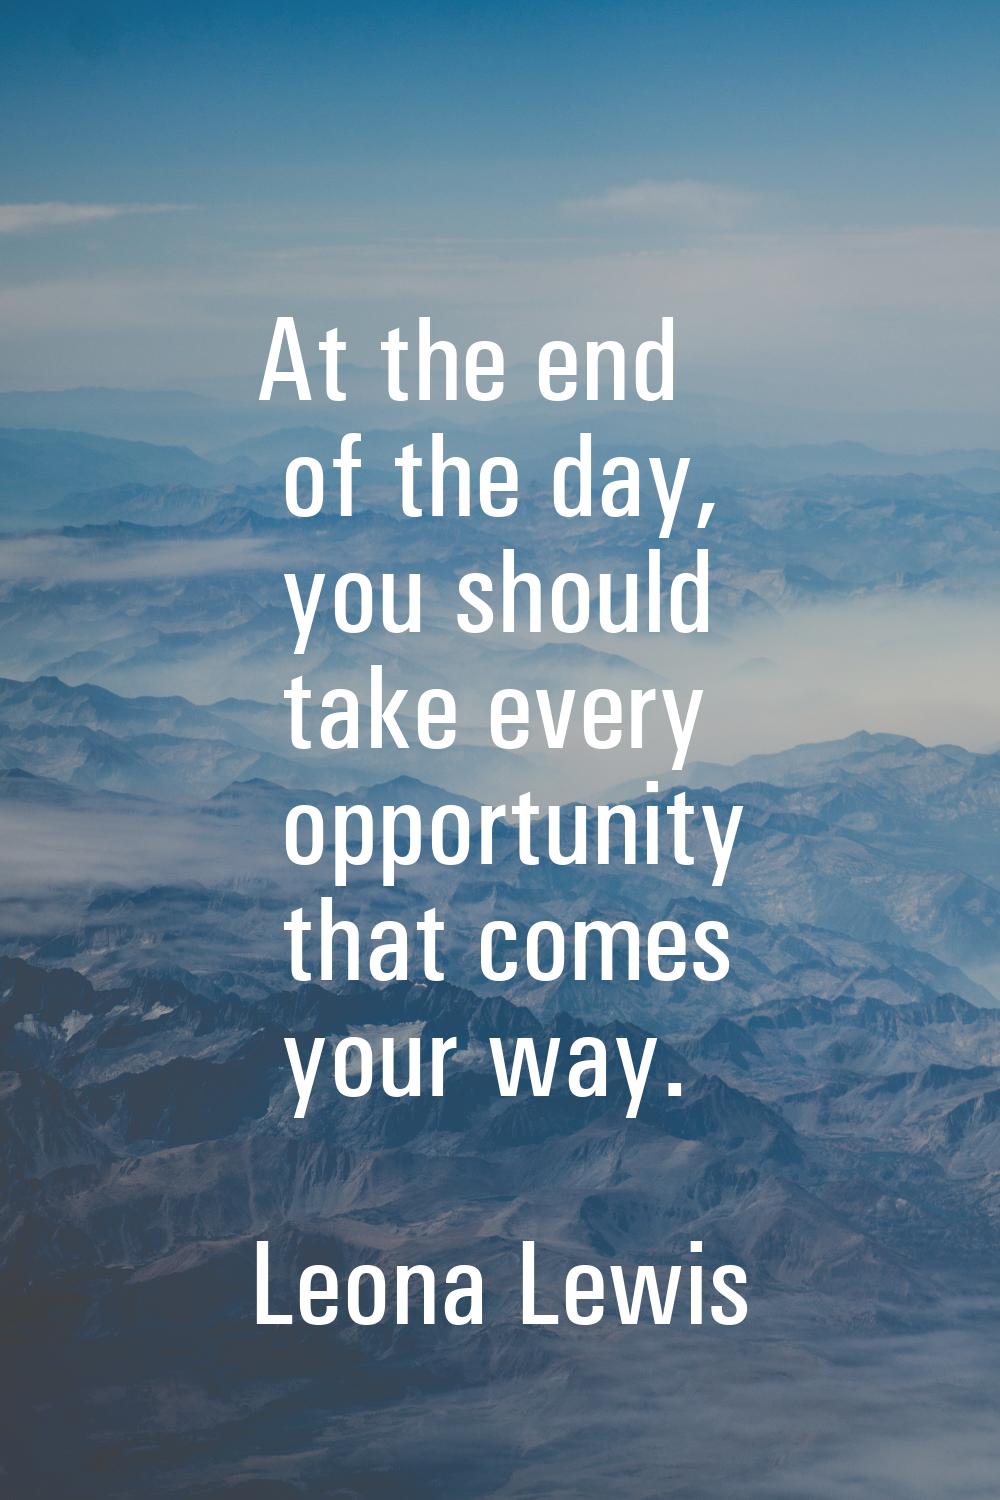 At the end of the day, you should take every opportunity that comes your way.